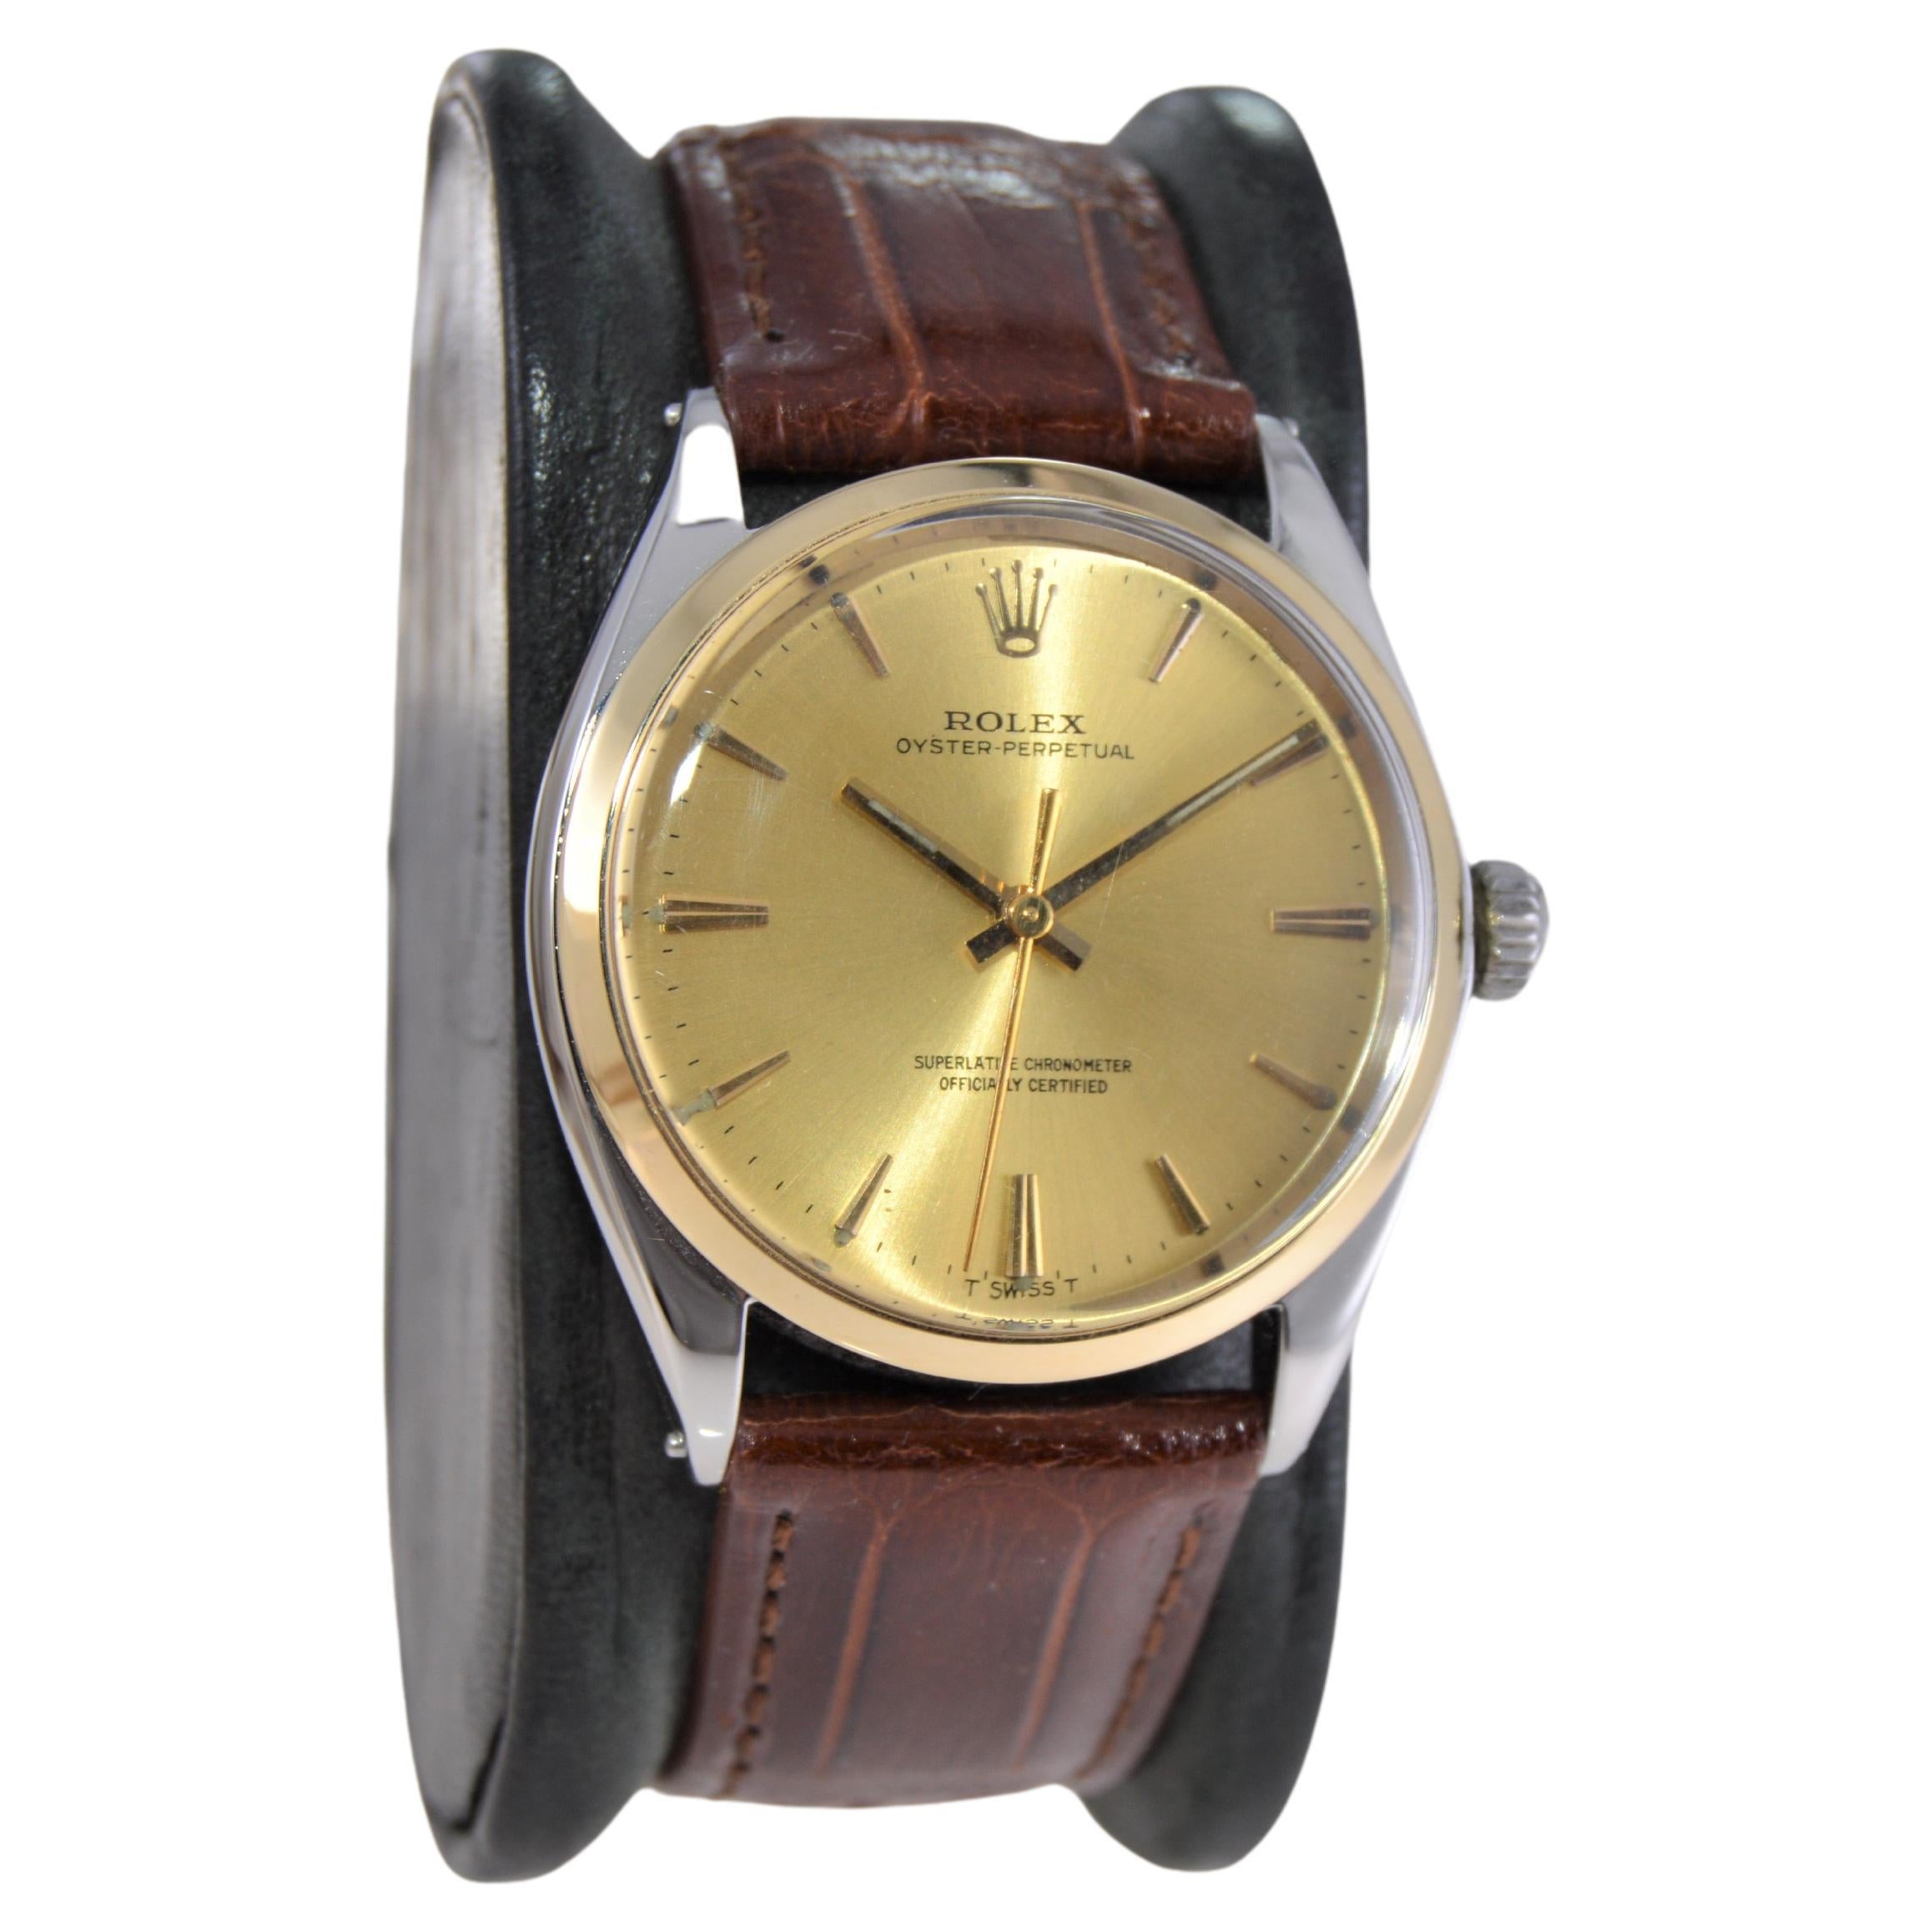 FACTORY / HOUSE: Rolex Watch Company
STYLE / REFERENCE: Oyster Perpetual / Reference 1005
METAL / MATERIAL: Two-Tone Steel and Solid Gold Bezel
CIRCA / YEAR: 1965
DIMENSIONS / SIZE: 40mm Length X 34mm Diameter
MOVEMENT / CALIBER: Perpetual Winding /